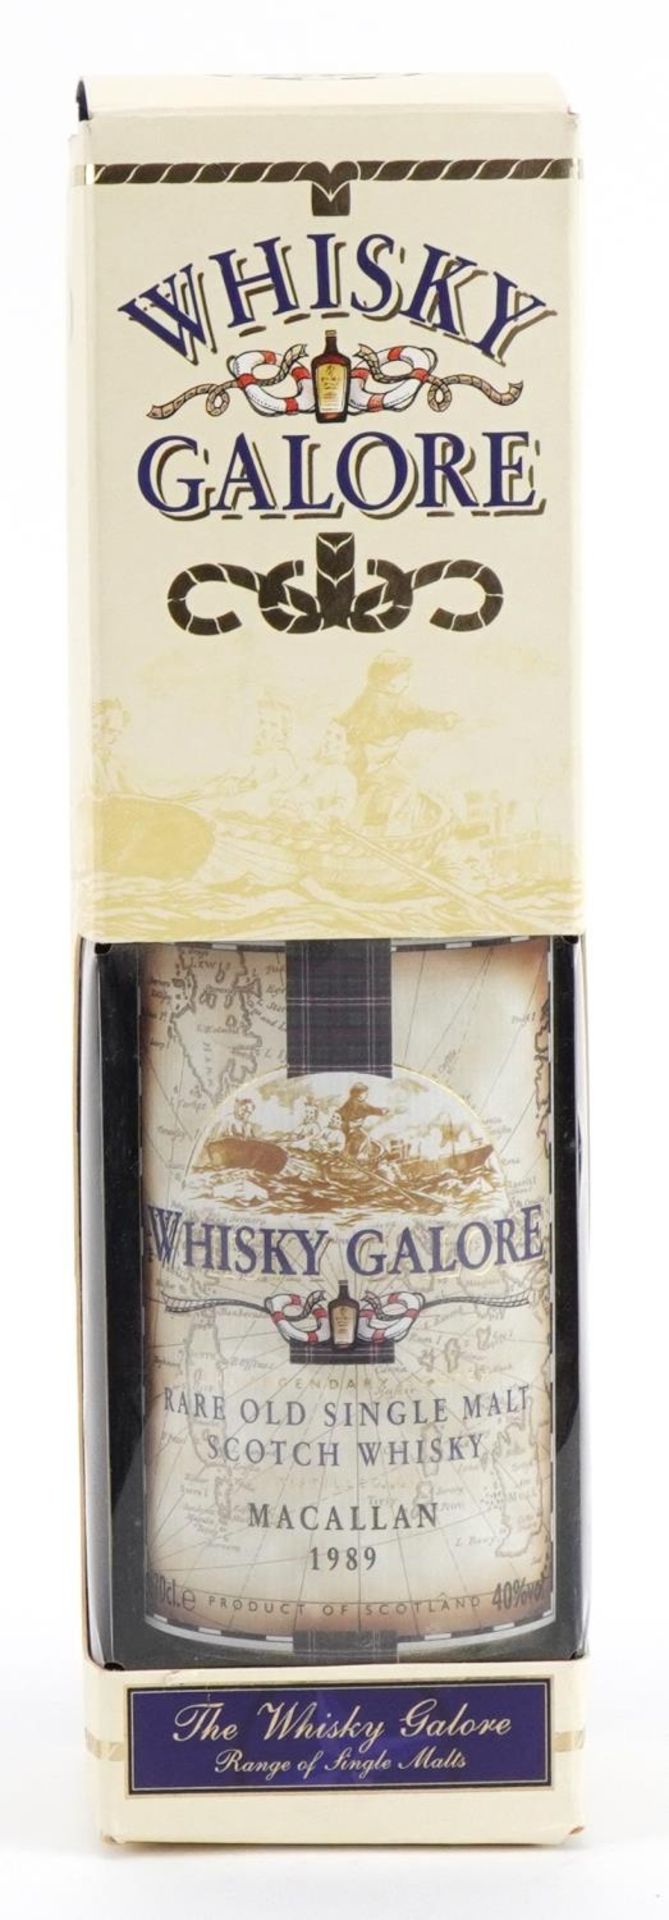 Bottle of Whisky Galore Rare Old Single Malt whisky, with box, distilled at Macallan 1989 : For